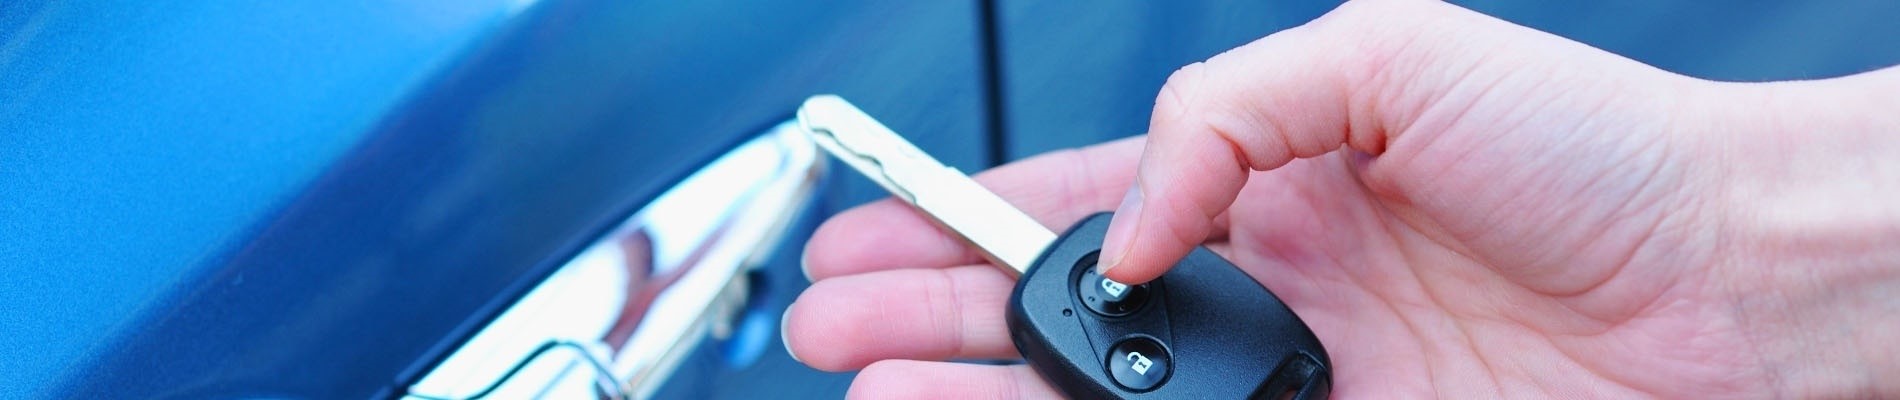 We offer, Fast and high quality ignition key work!